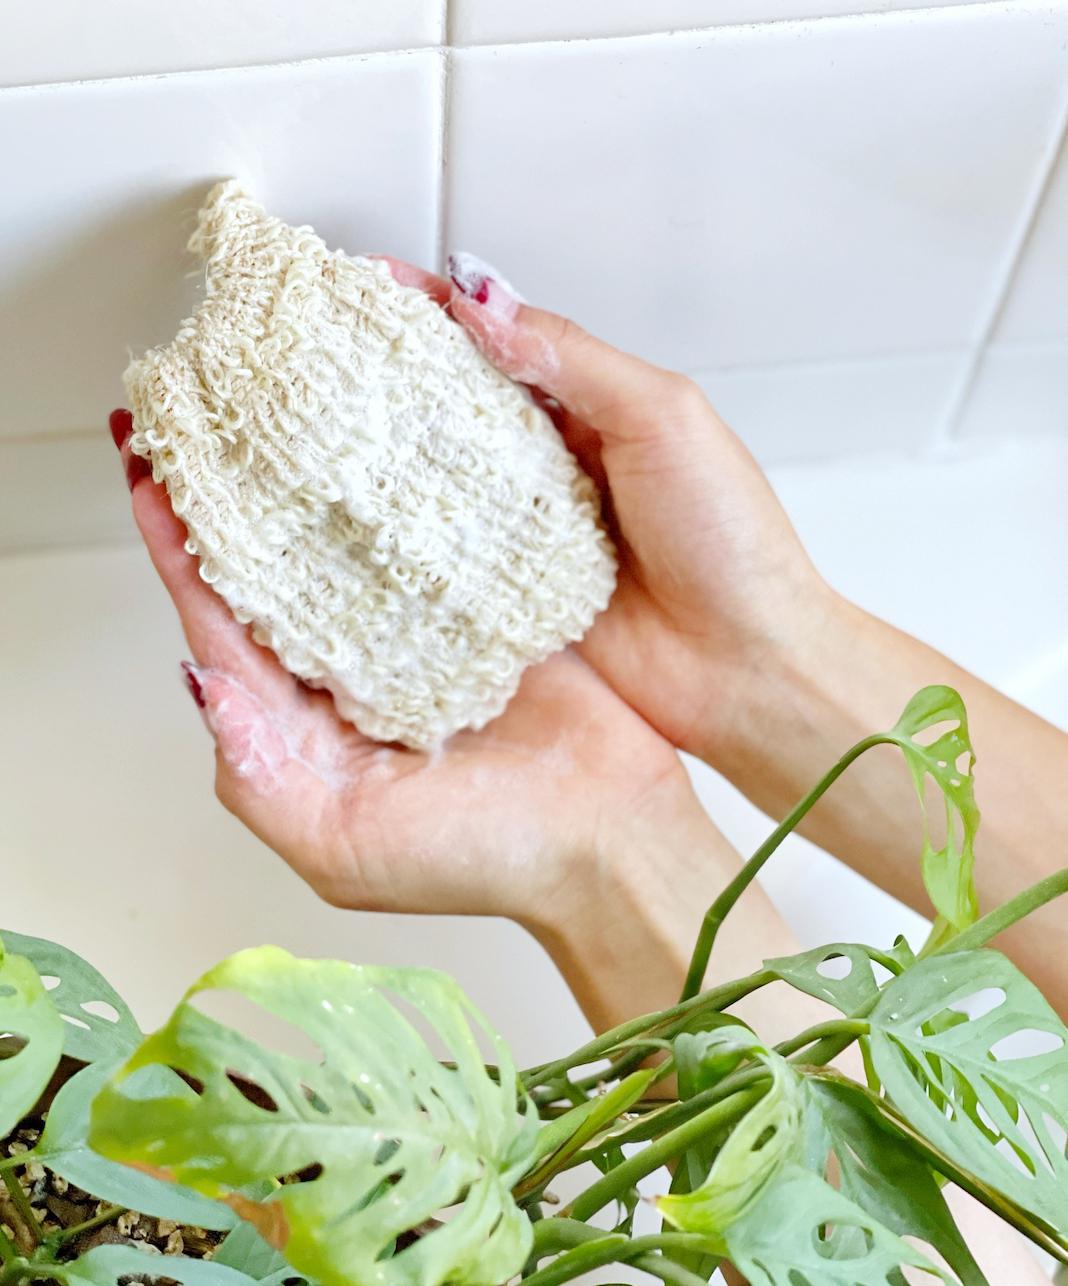 Soap Saver Pouch, Biodegradable Natural Sisal